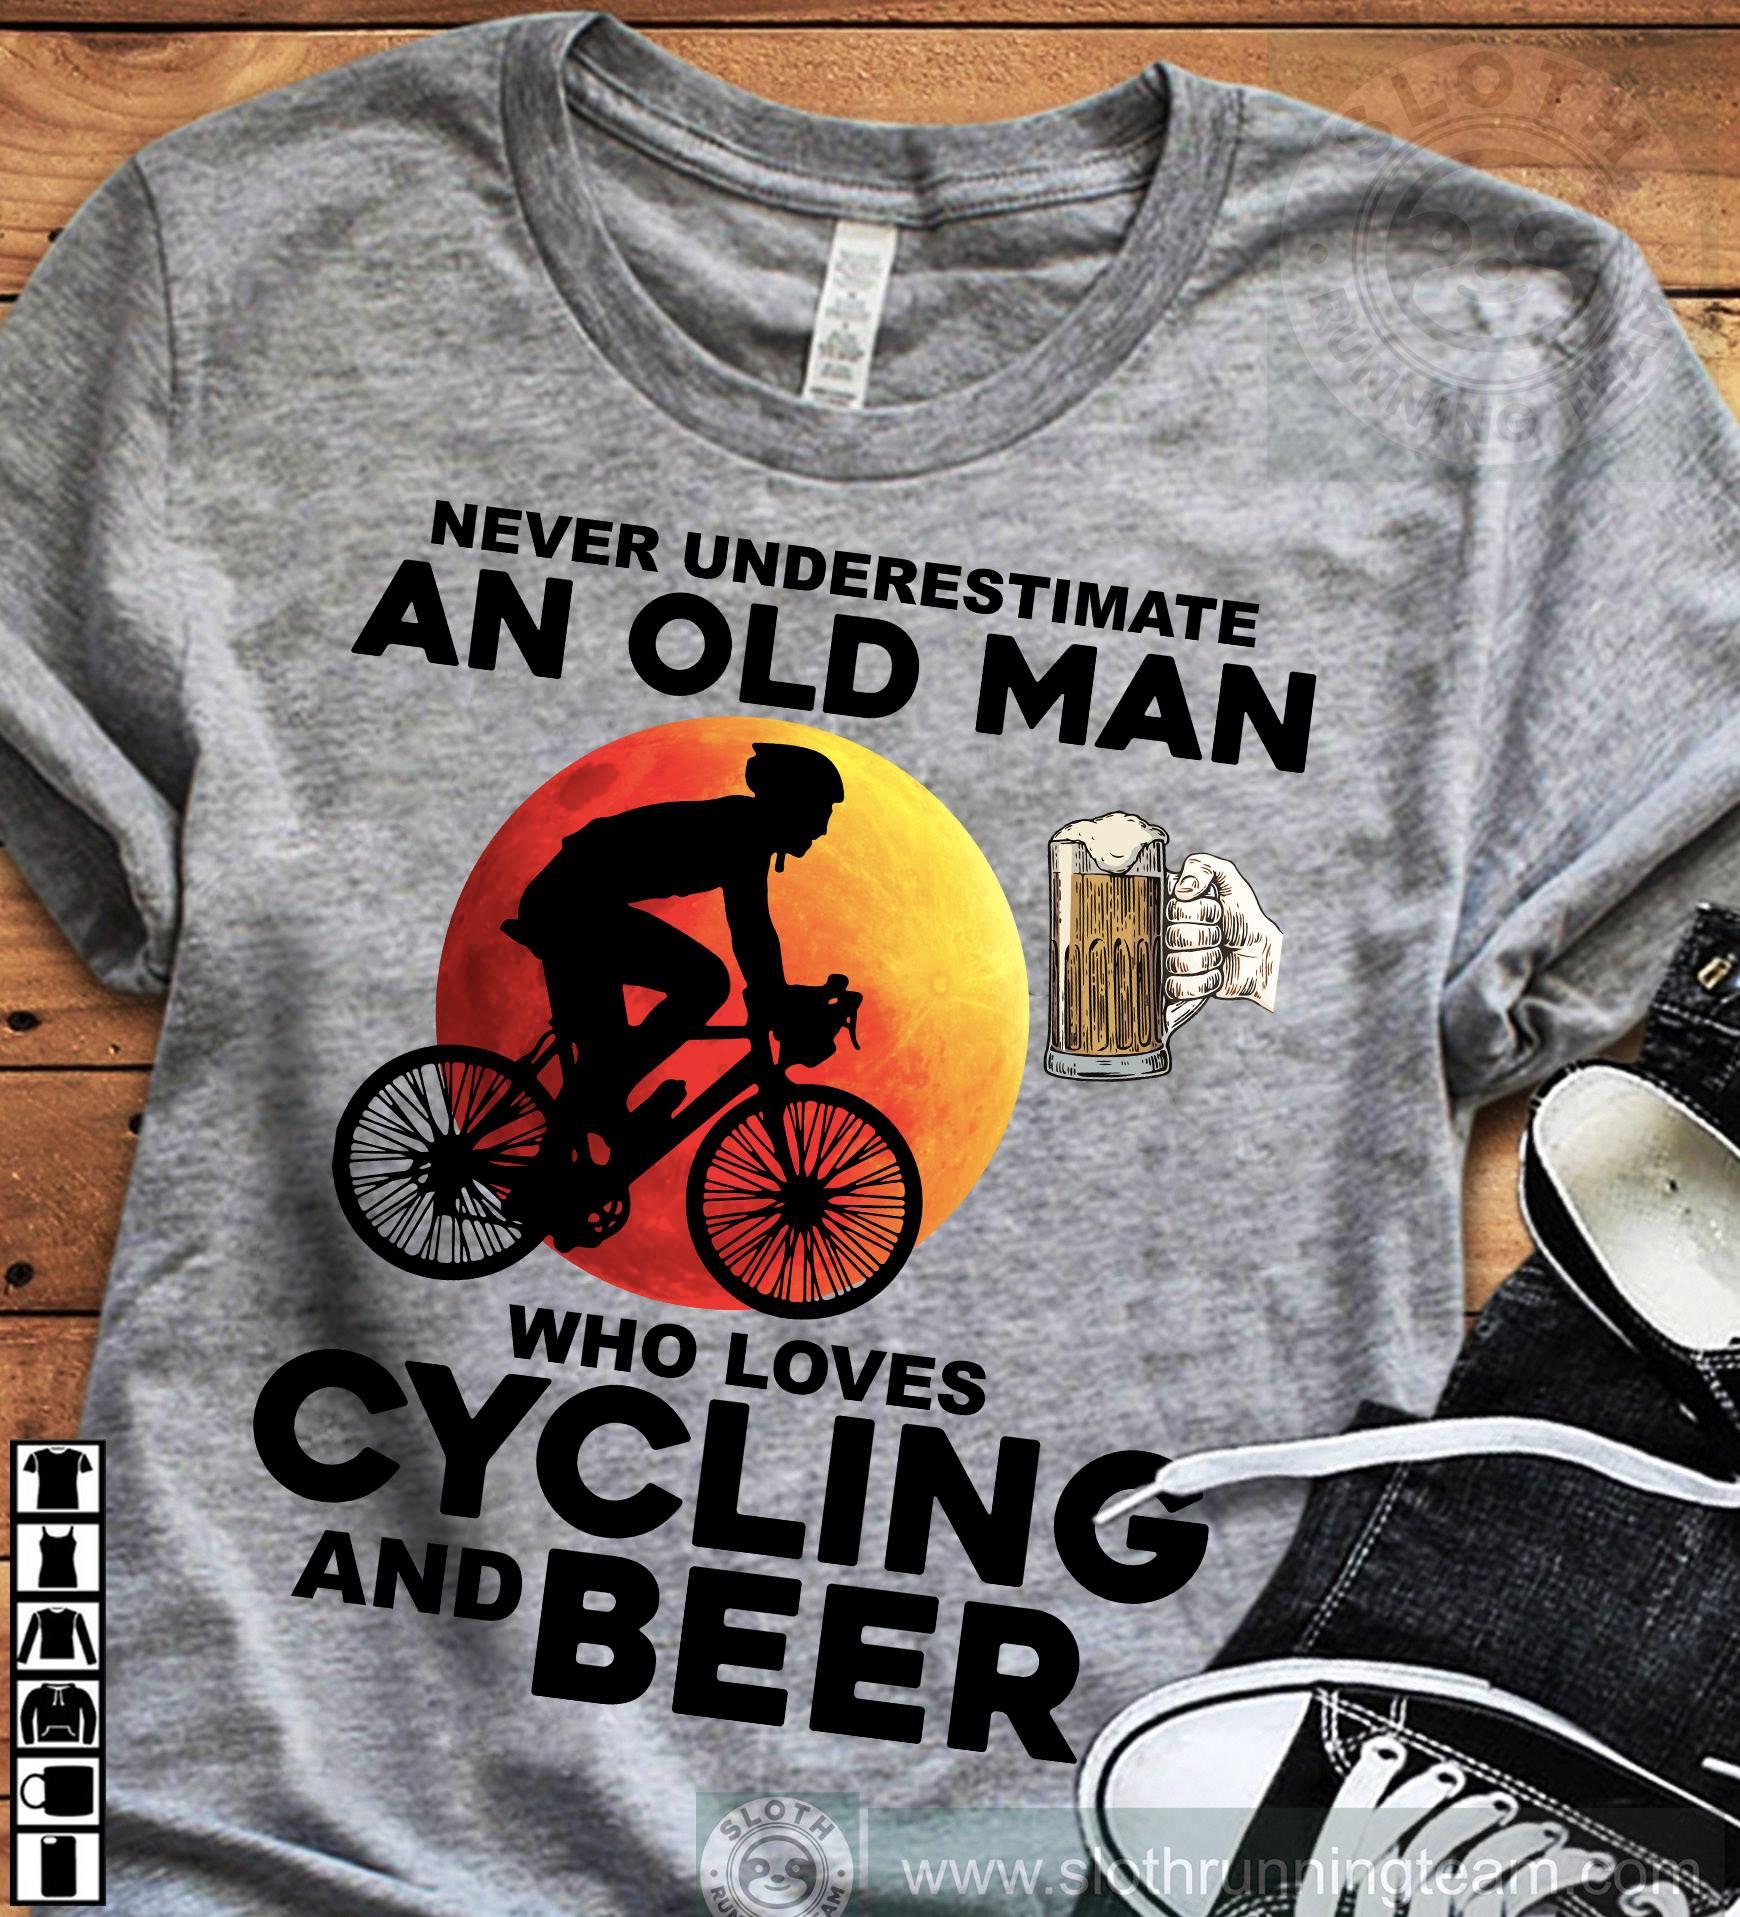 Cycling Beer - Never underestimate an old man who loves cycling and beer